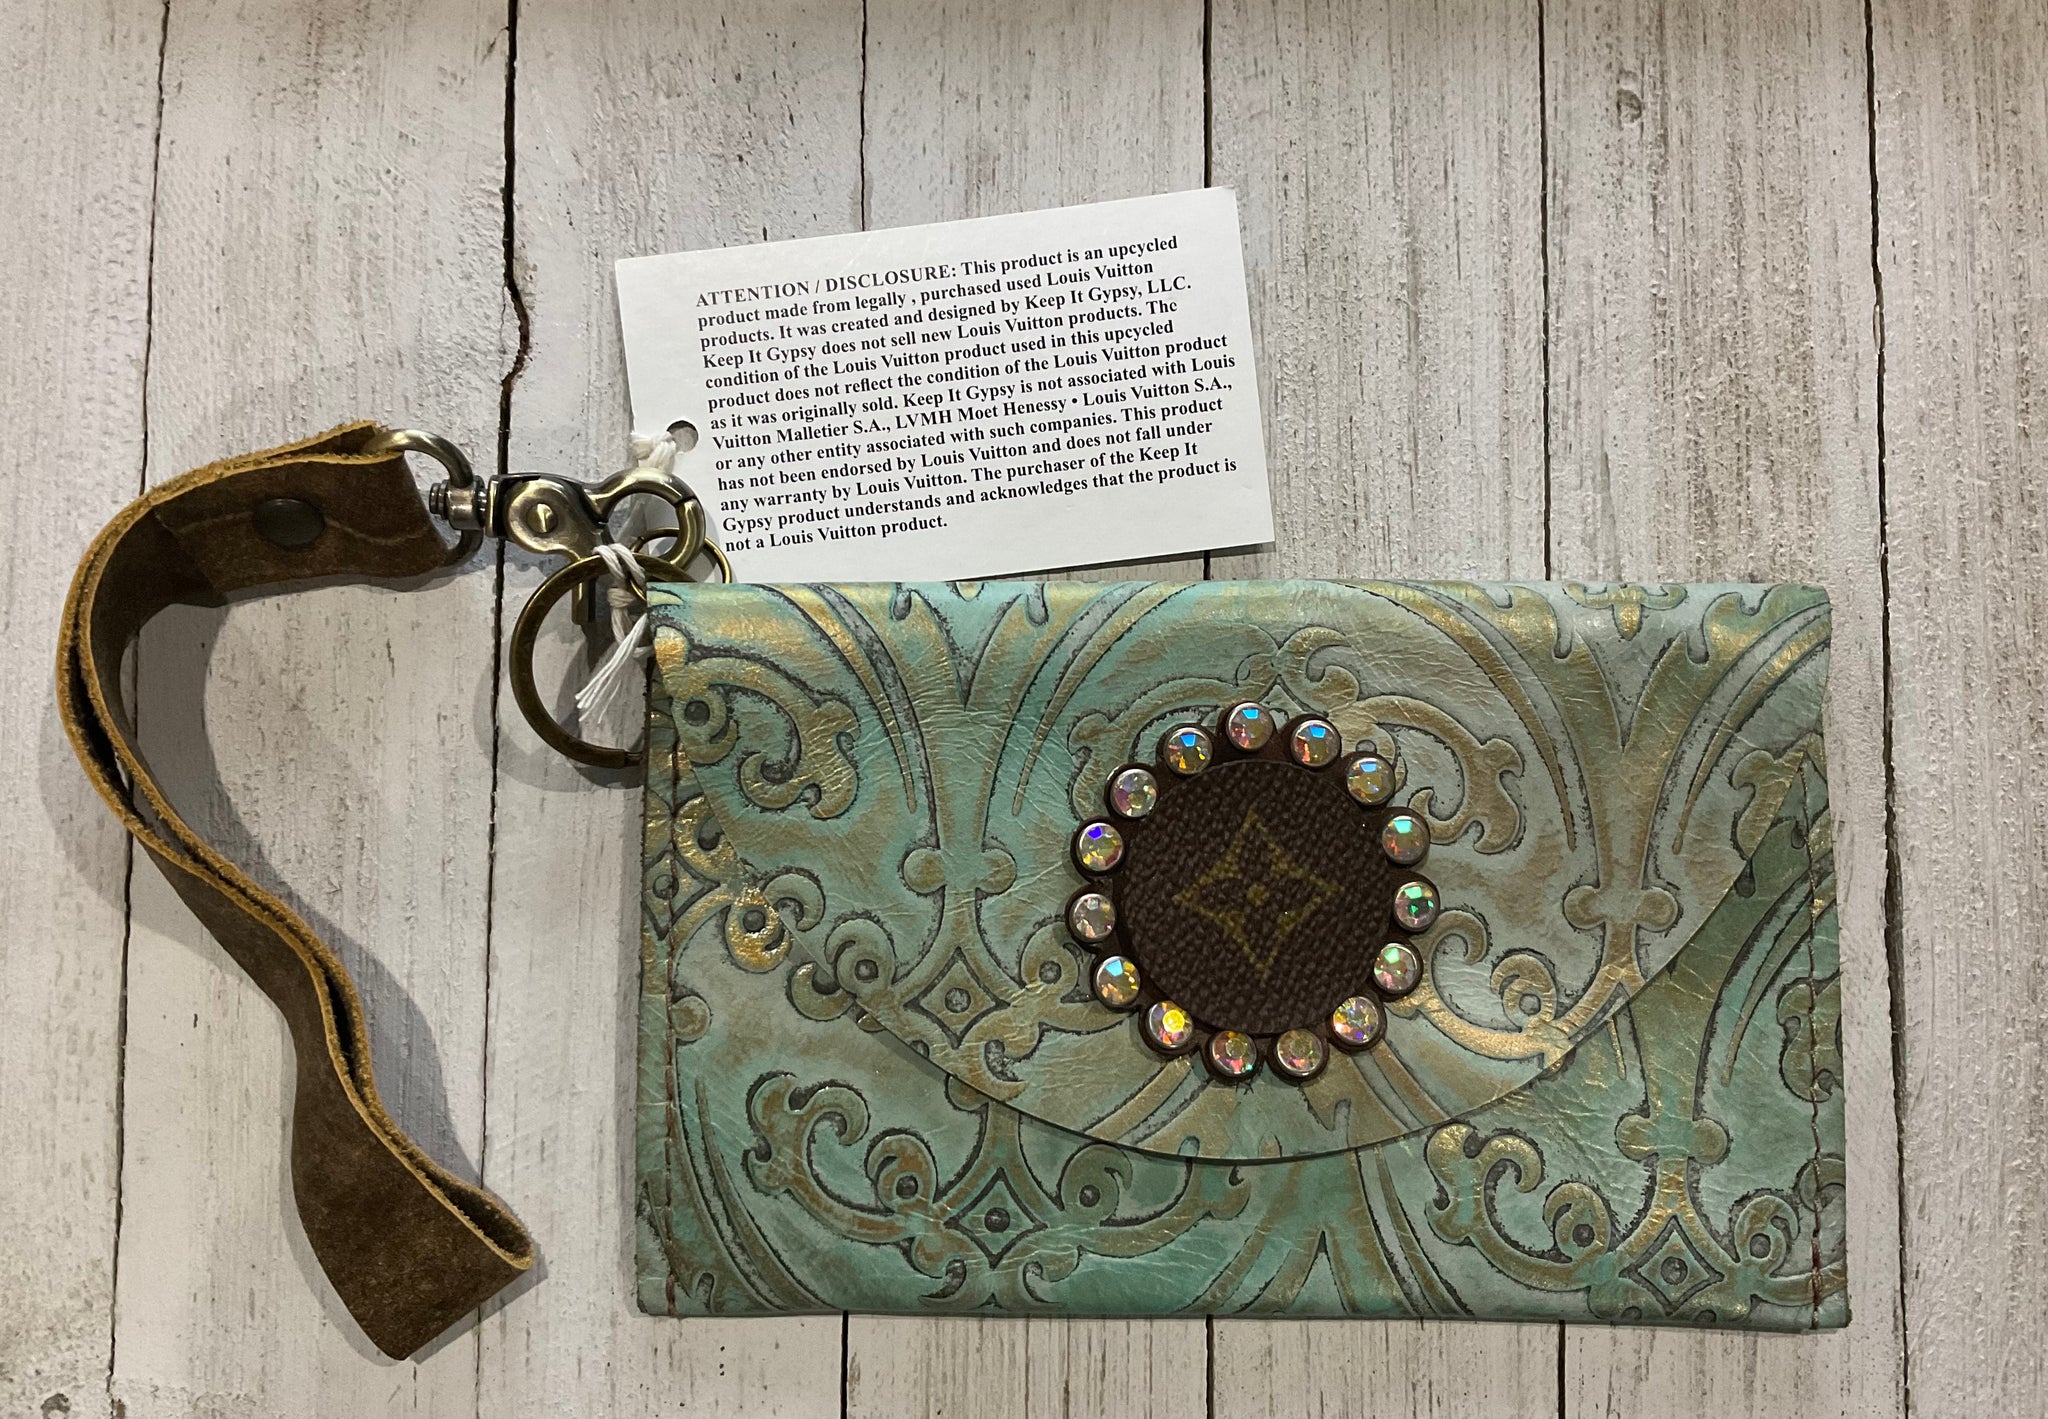 Norma: Small Tooled Shimmer Turquoise Envelope Wristlet